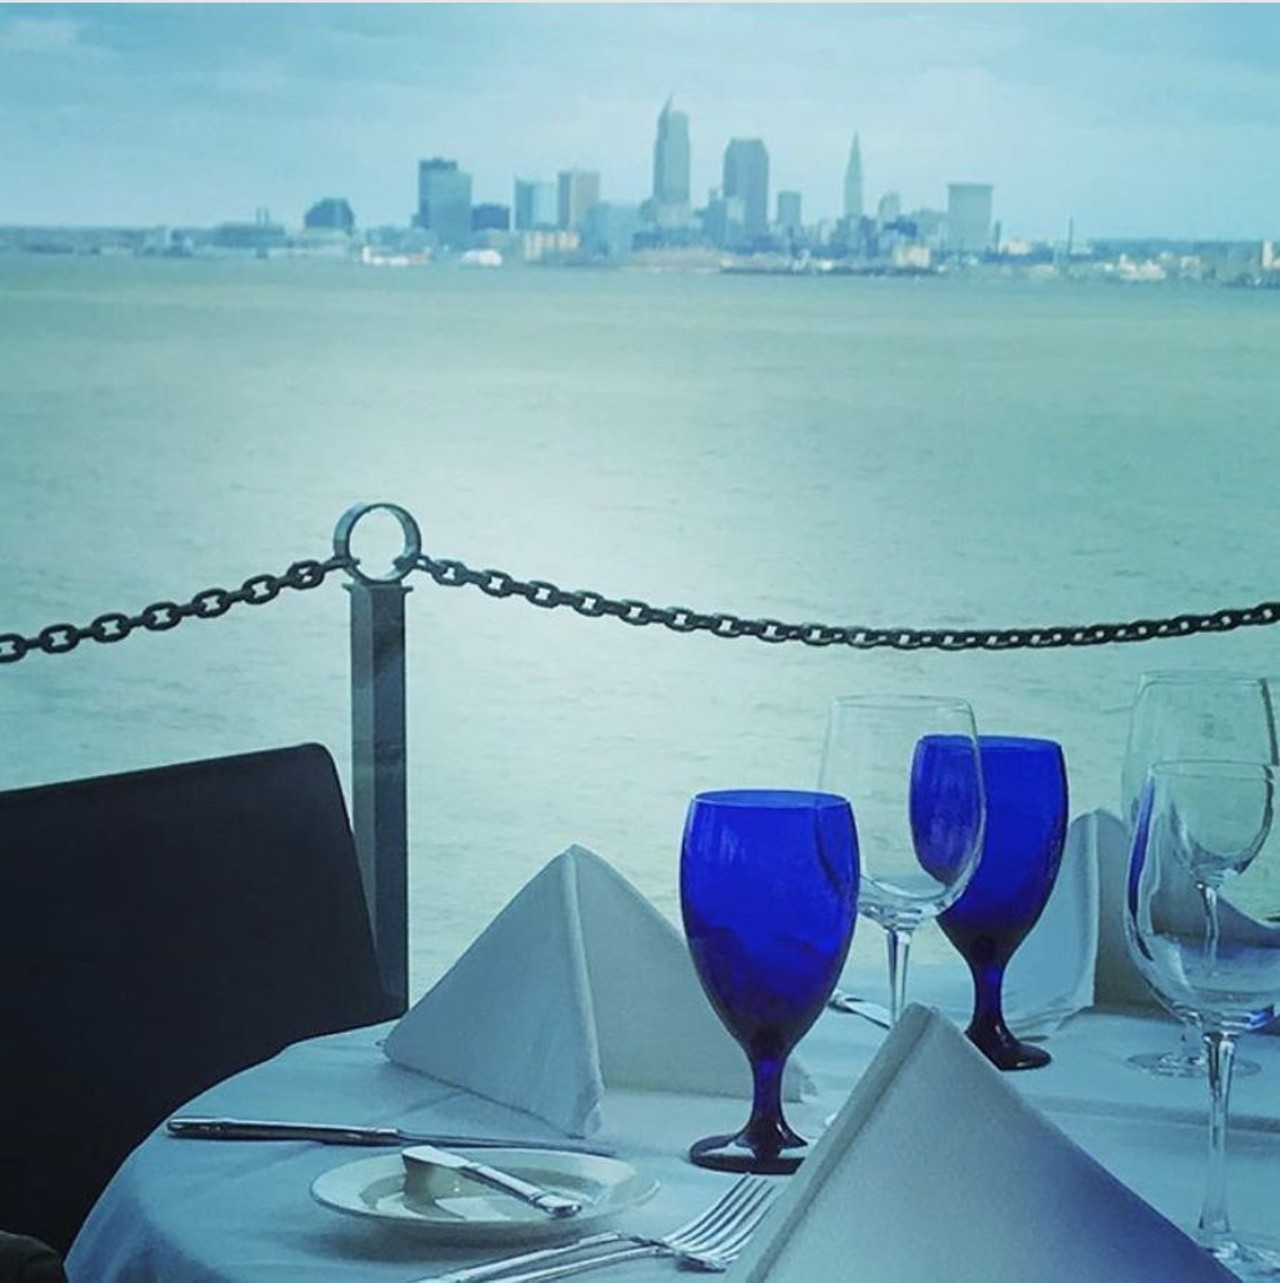 Pier W
12700 Lake Ave., Lakewood
Pier W is one of Cleveland&#146;s most stunning restaurants, due in no small part to the floor to ceiling windows around the entire space, offering views of both the lake and the skyline
Photo via swagmommy_3/Instagram